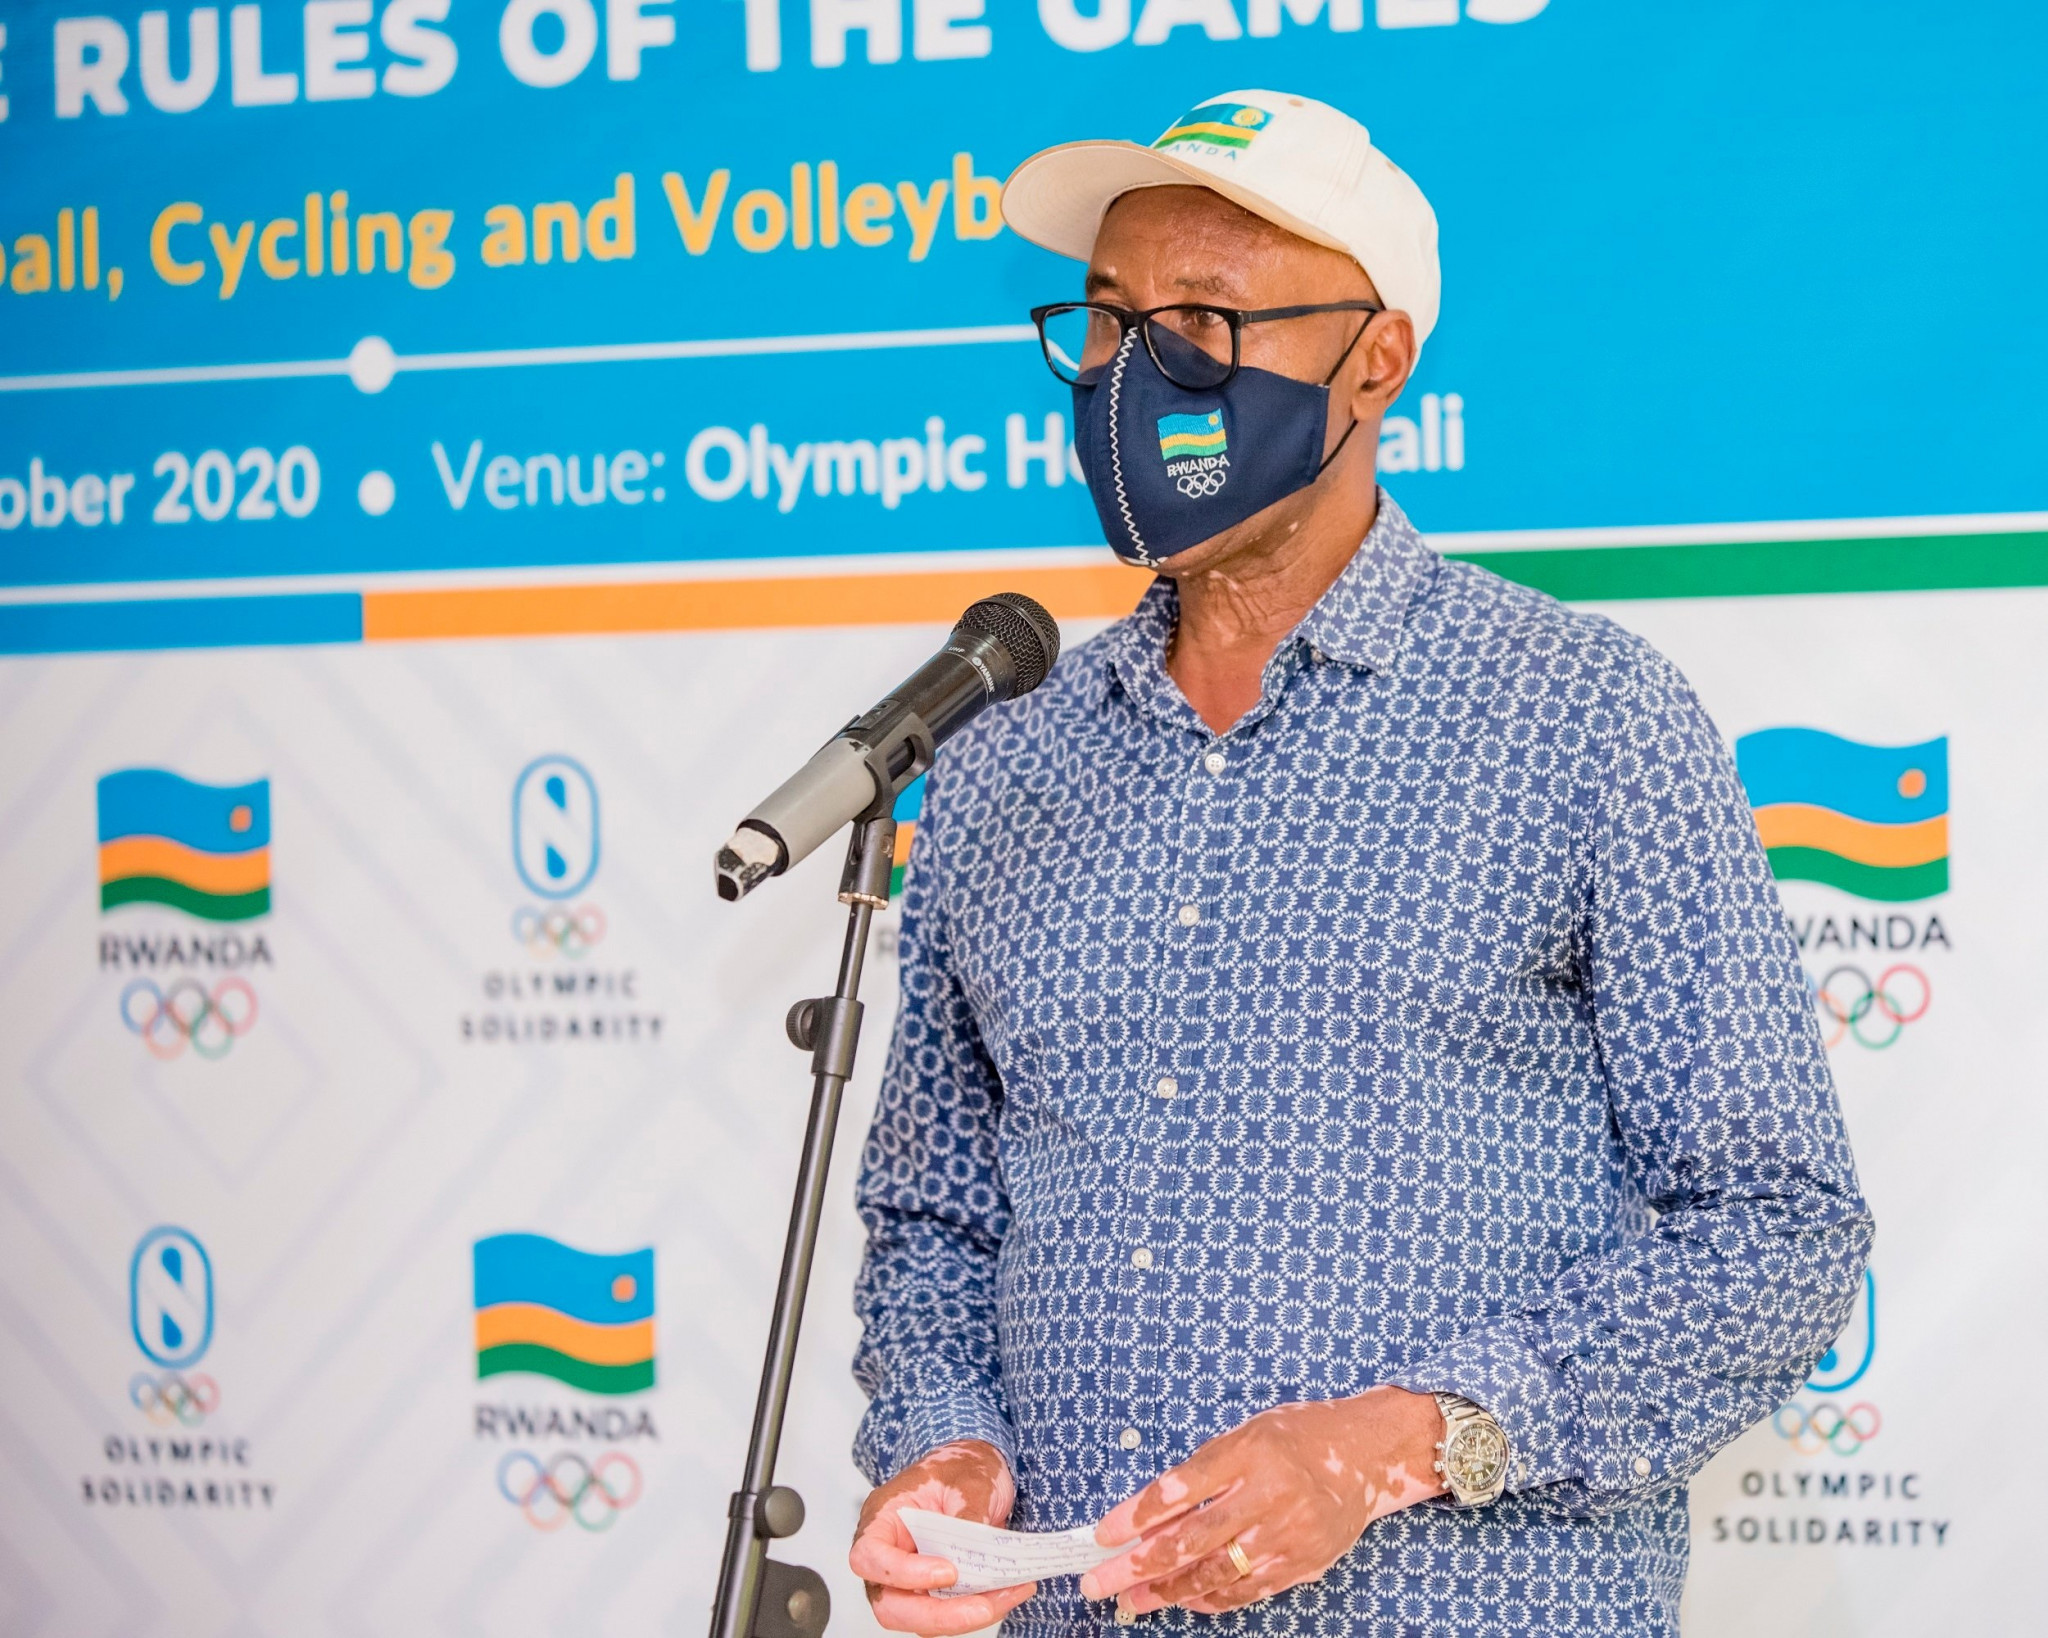 Rwanda NOC to hold training camp as part of two-year plan for 2022 African Youth Games success